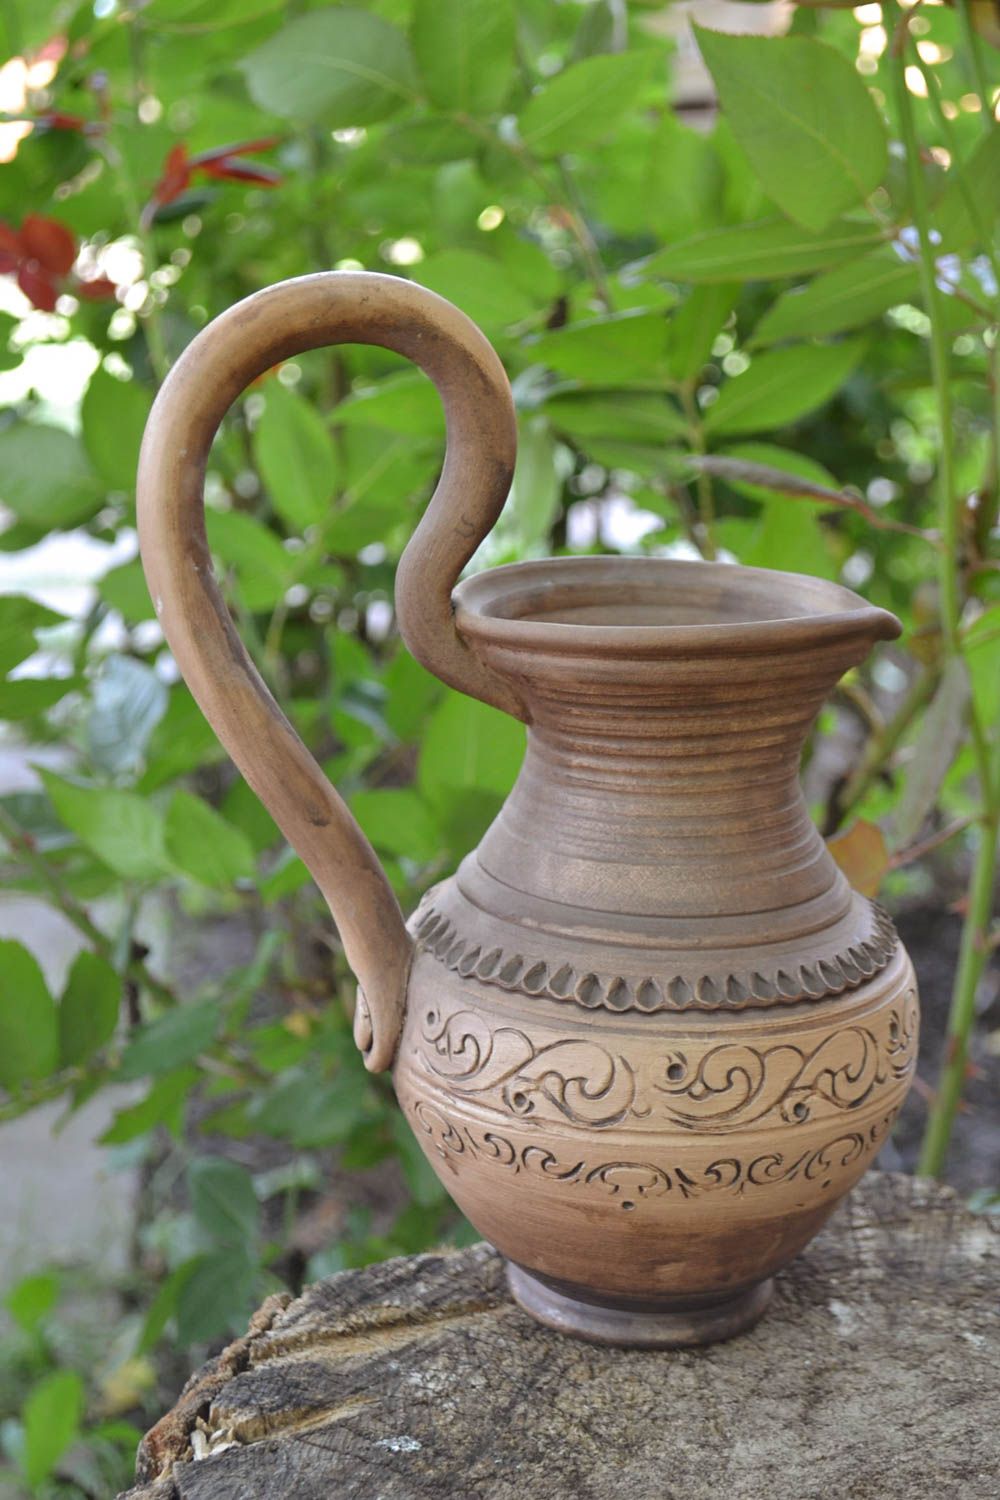 30 oz ceramic handmade water pitcher with long handle 1,6 lb photo 1